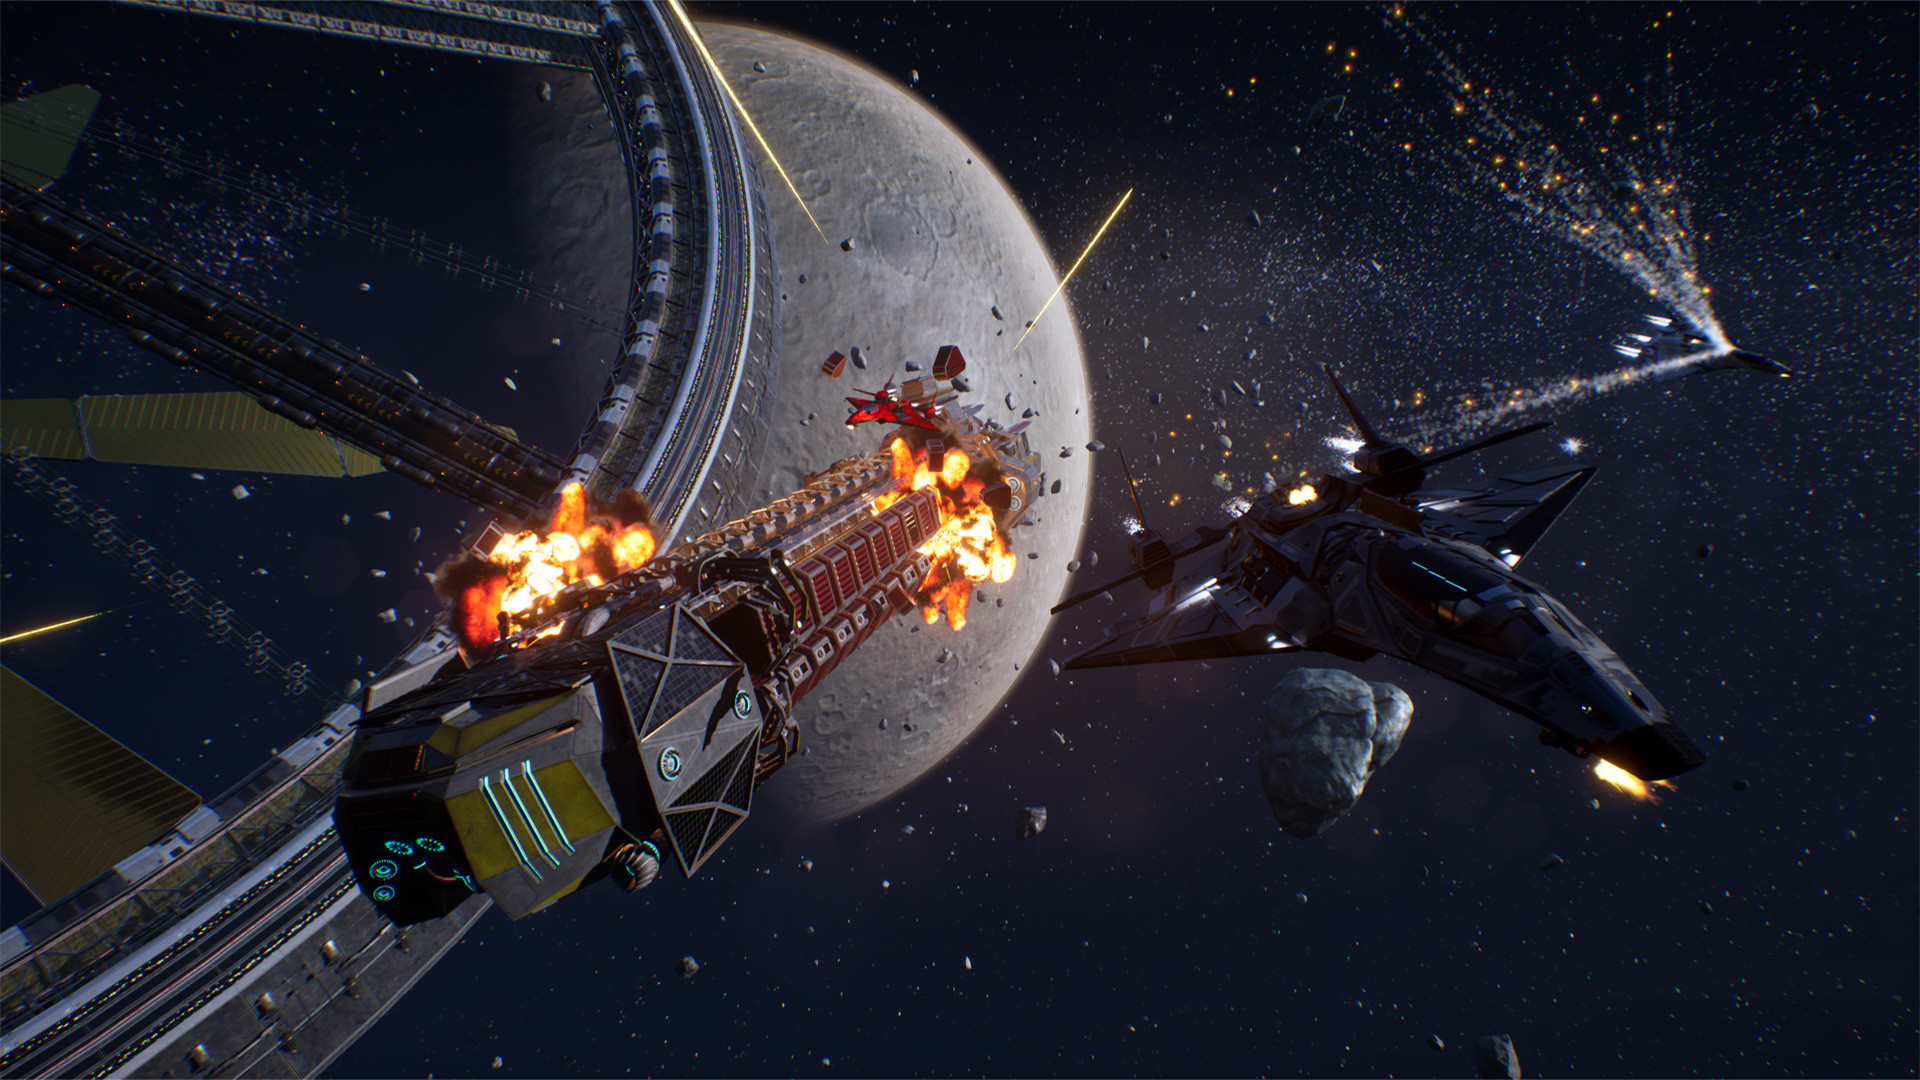 Space Battle Royale on Steam